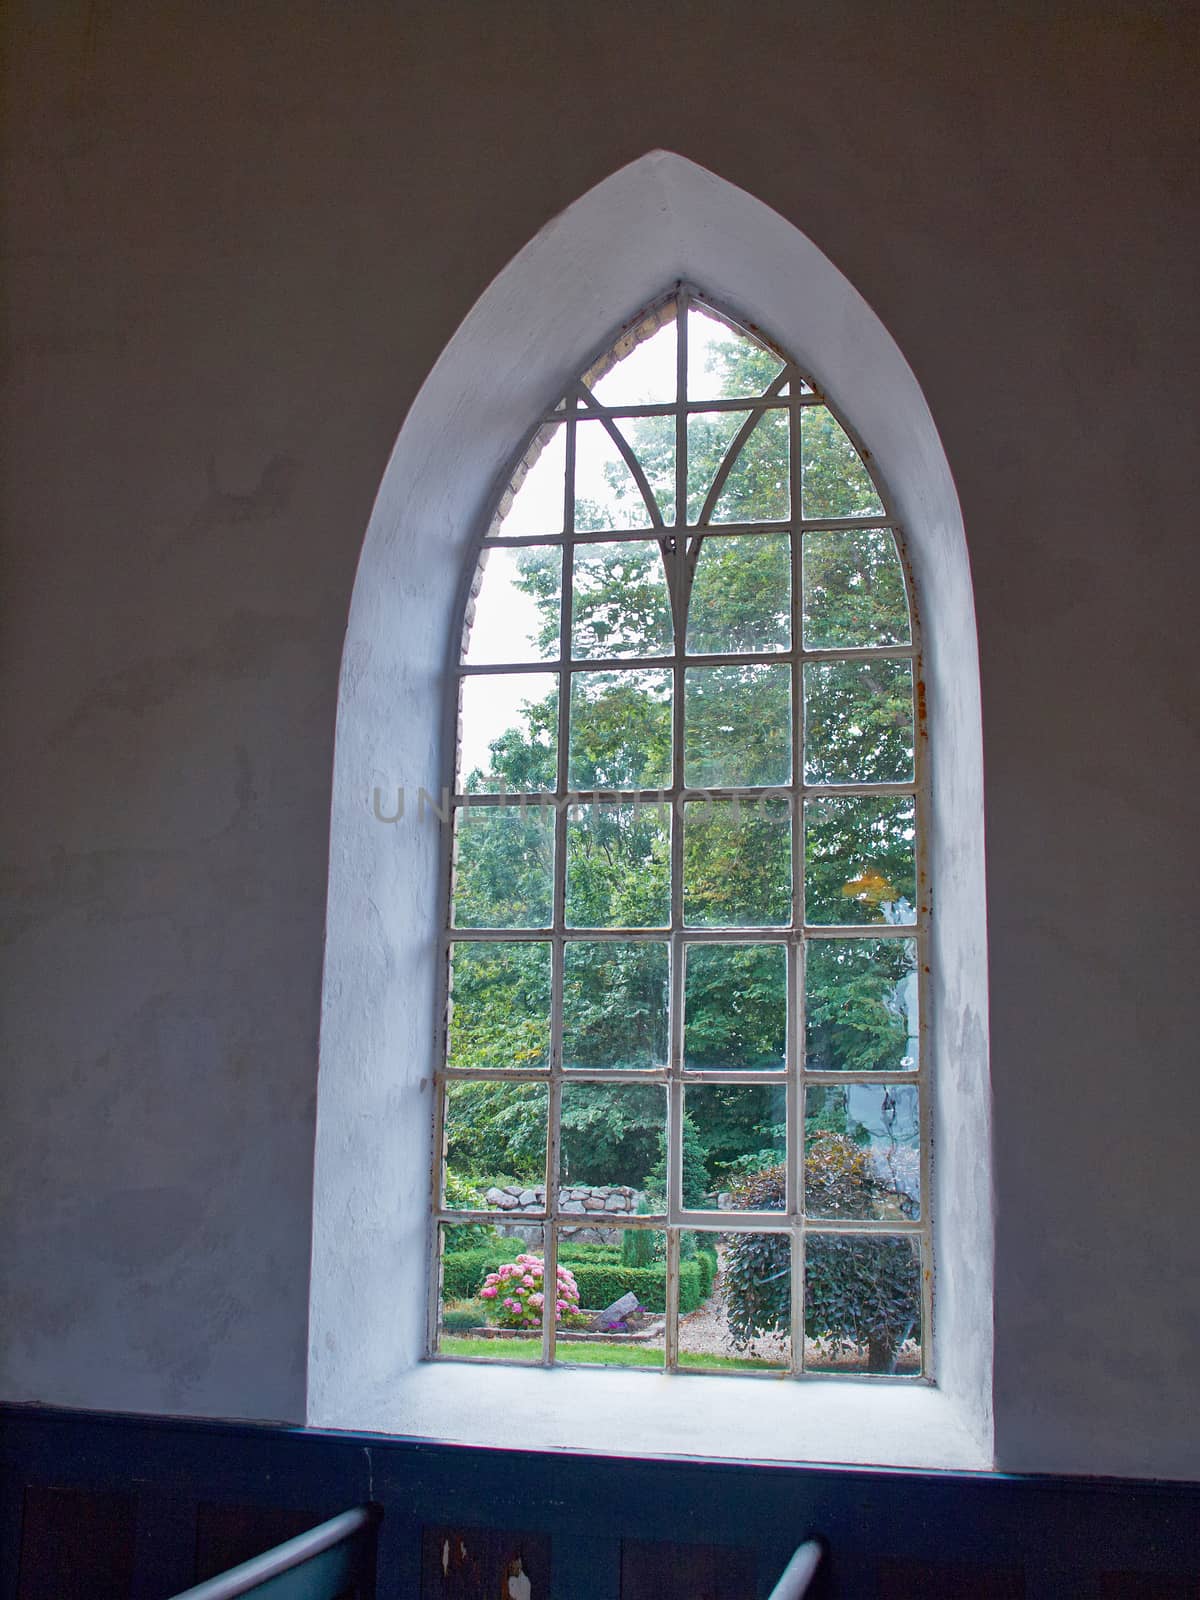 View of the world outside through a classical window of a church     